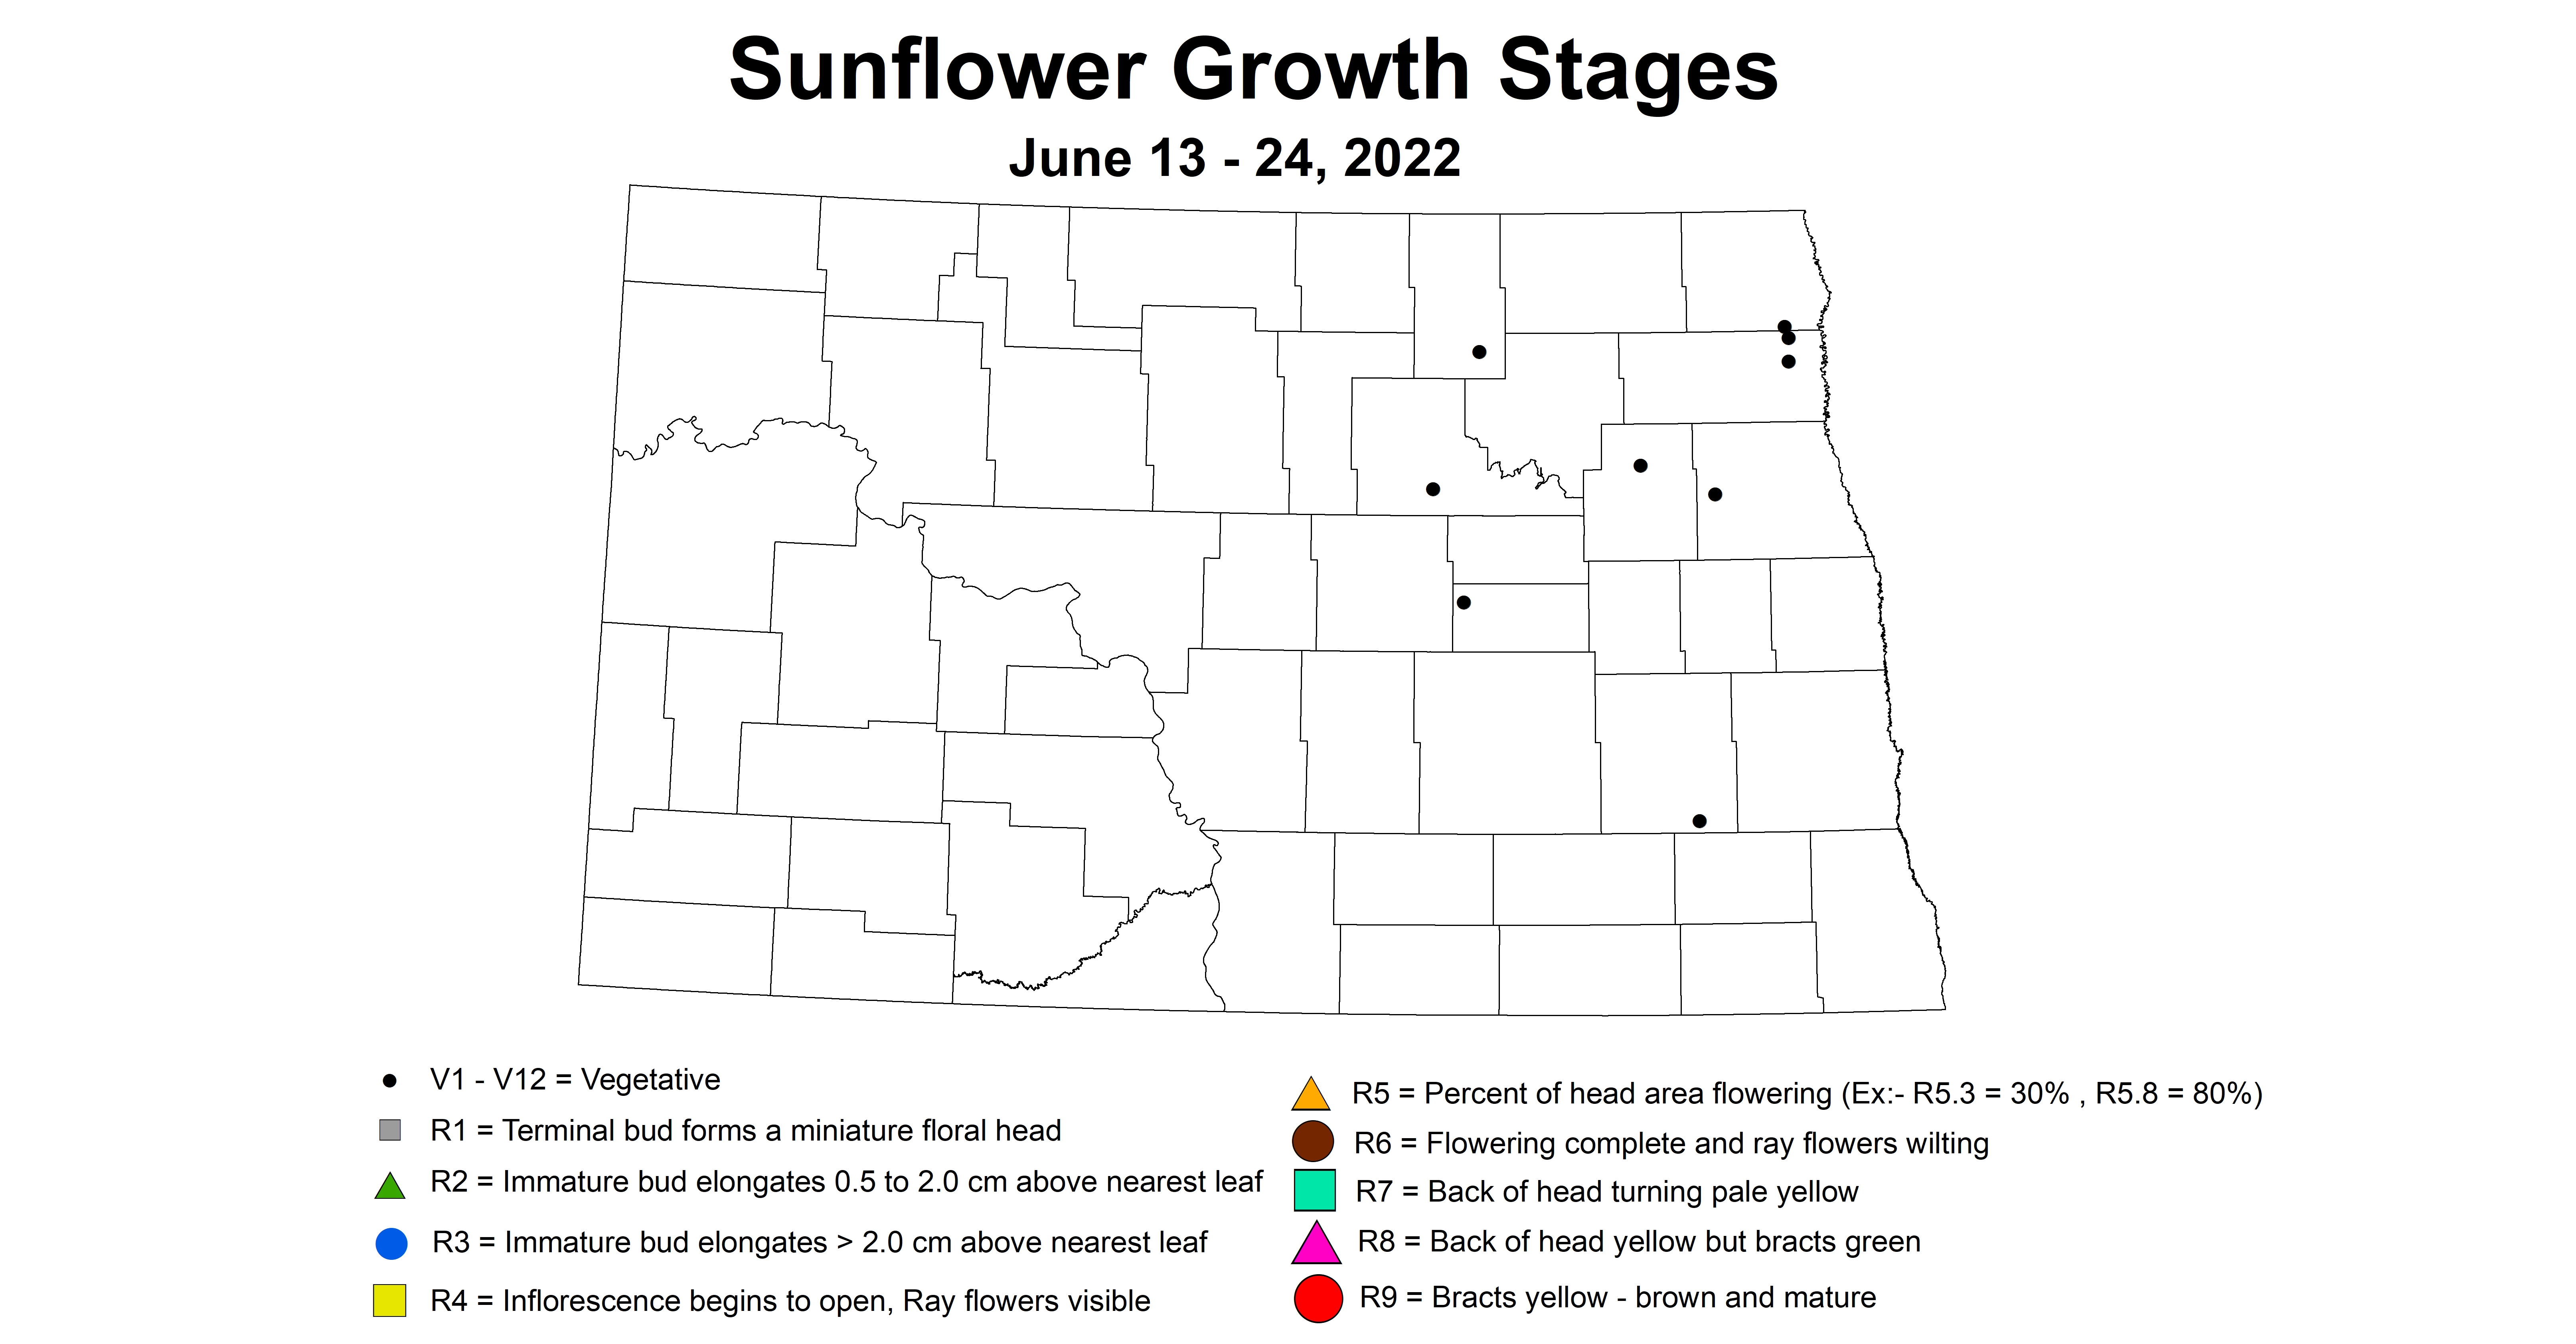 ND IPM map of sunflower growth stages June 13 - 24, 2022